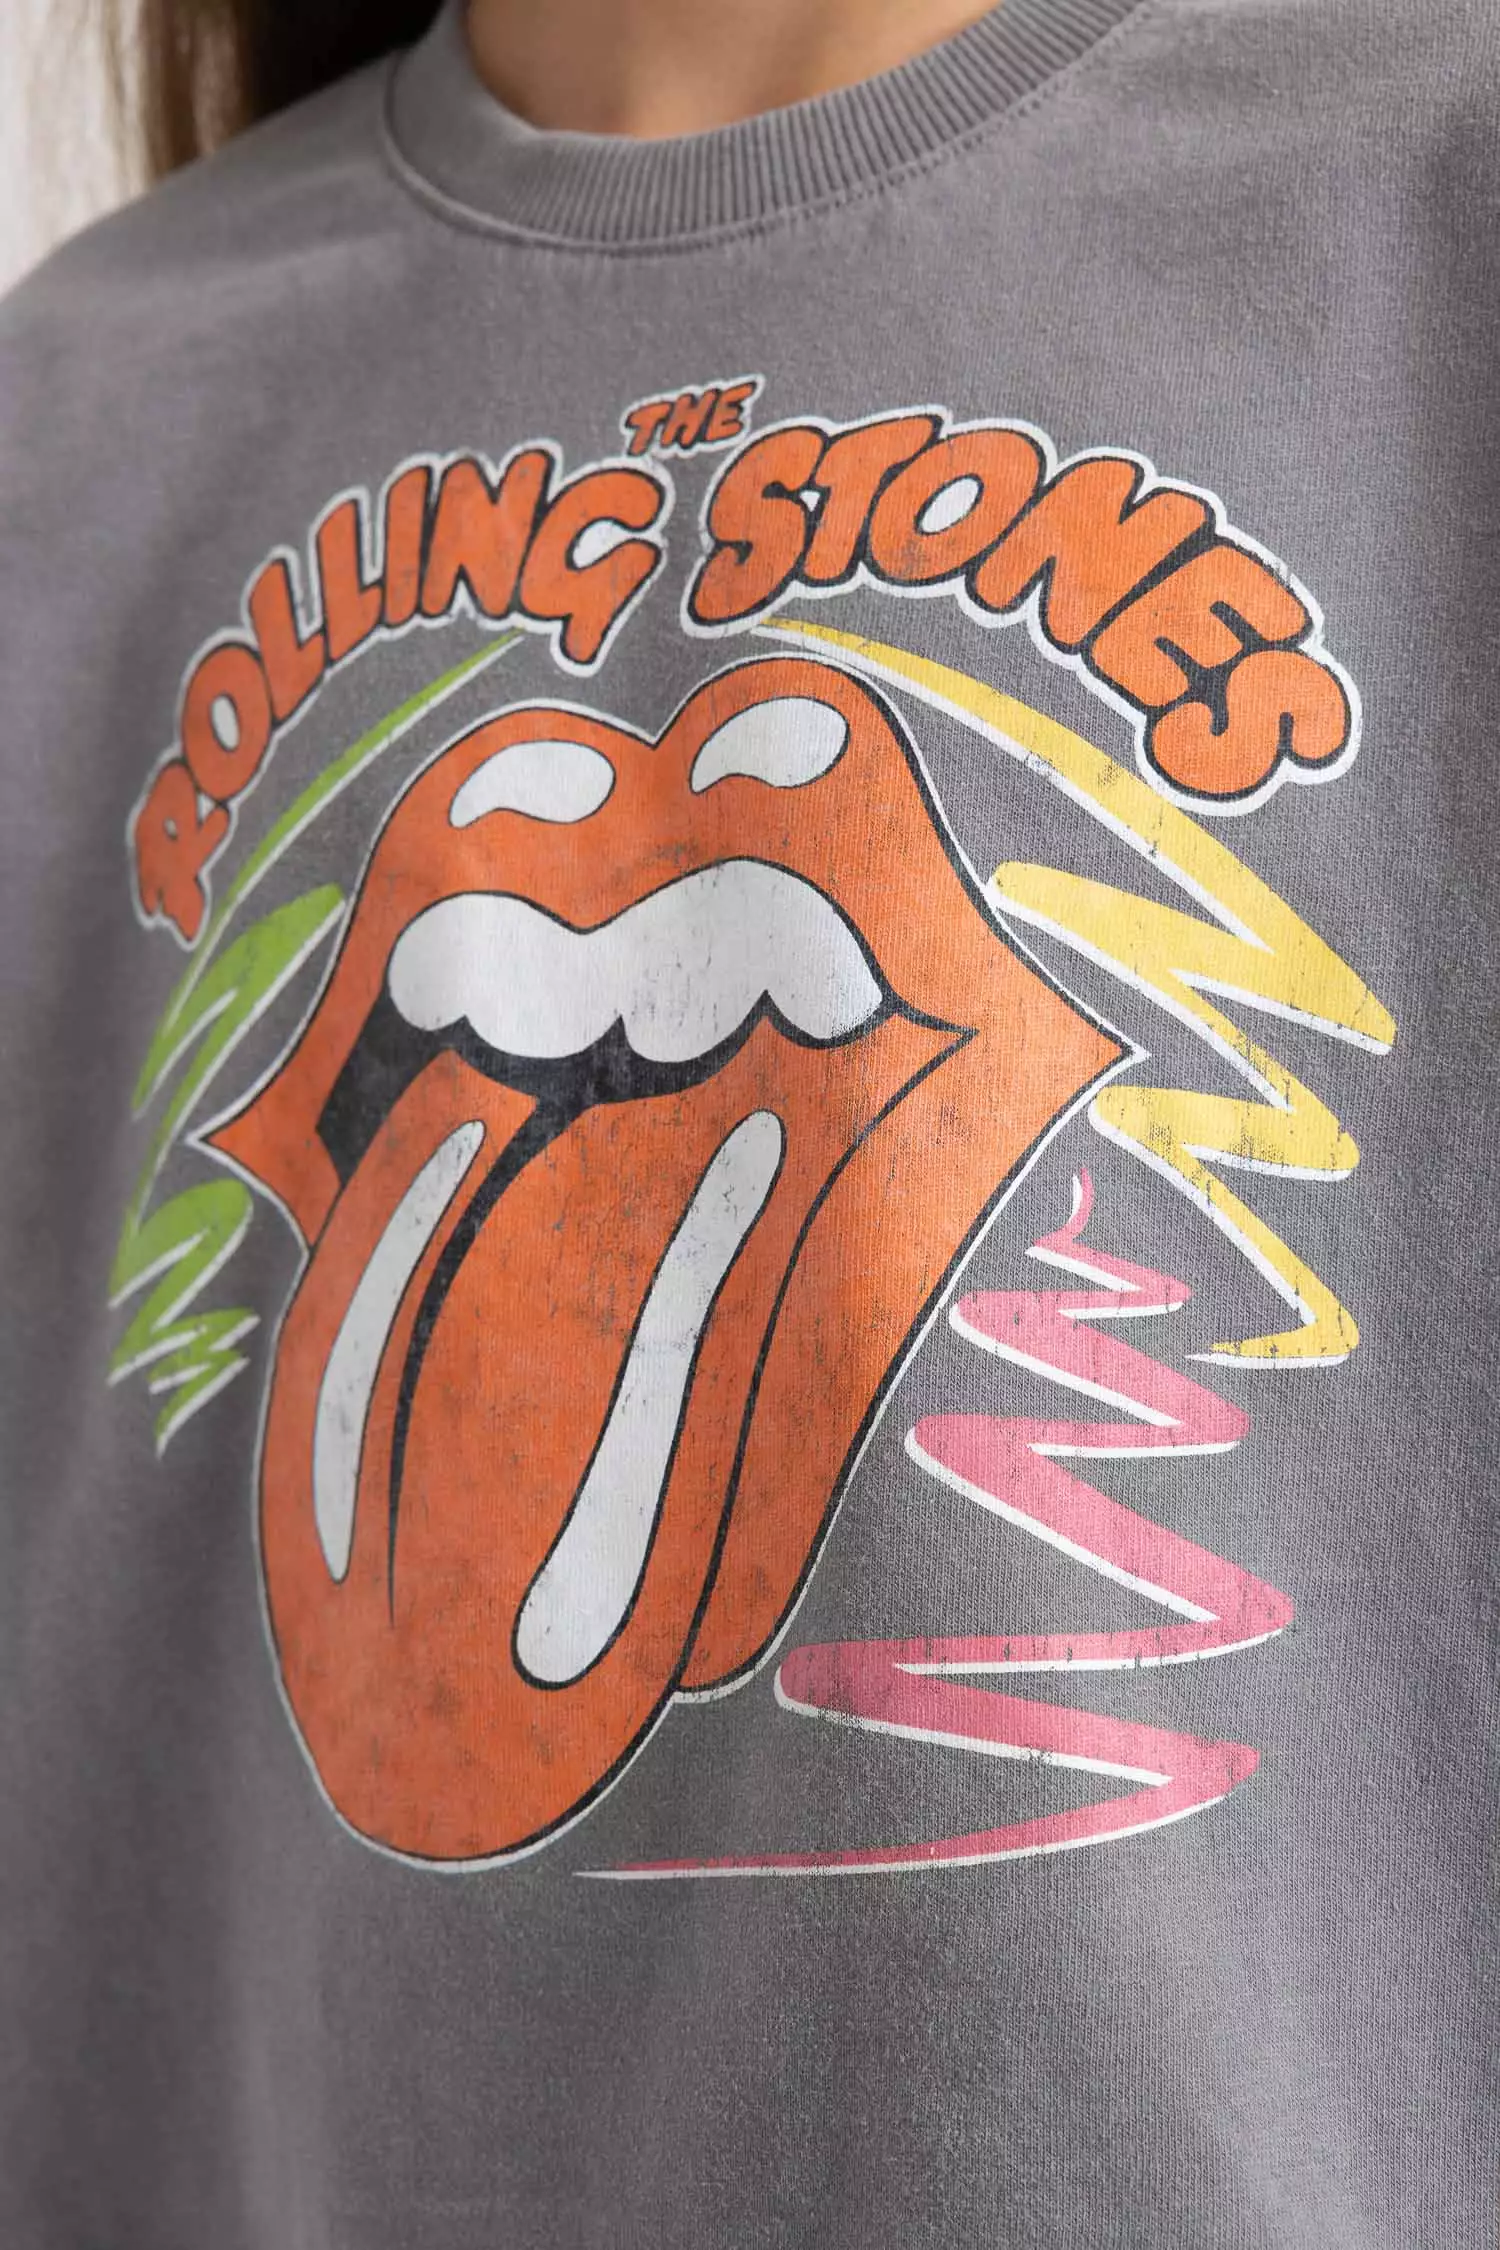 Relax Fit Rolling Stones Licensed Long Sleeve Cotton Body